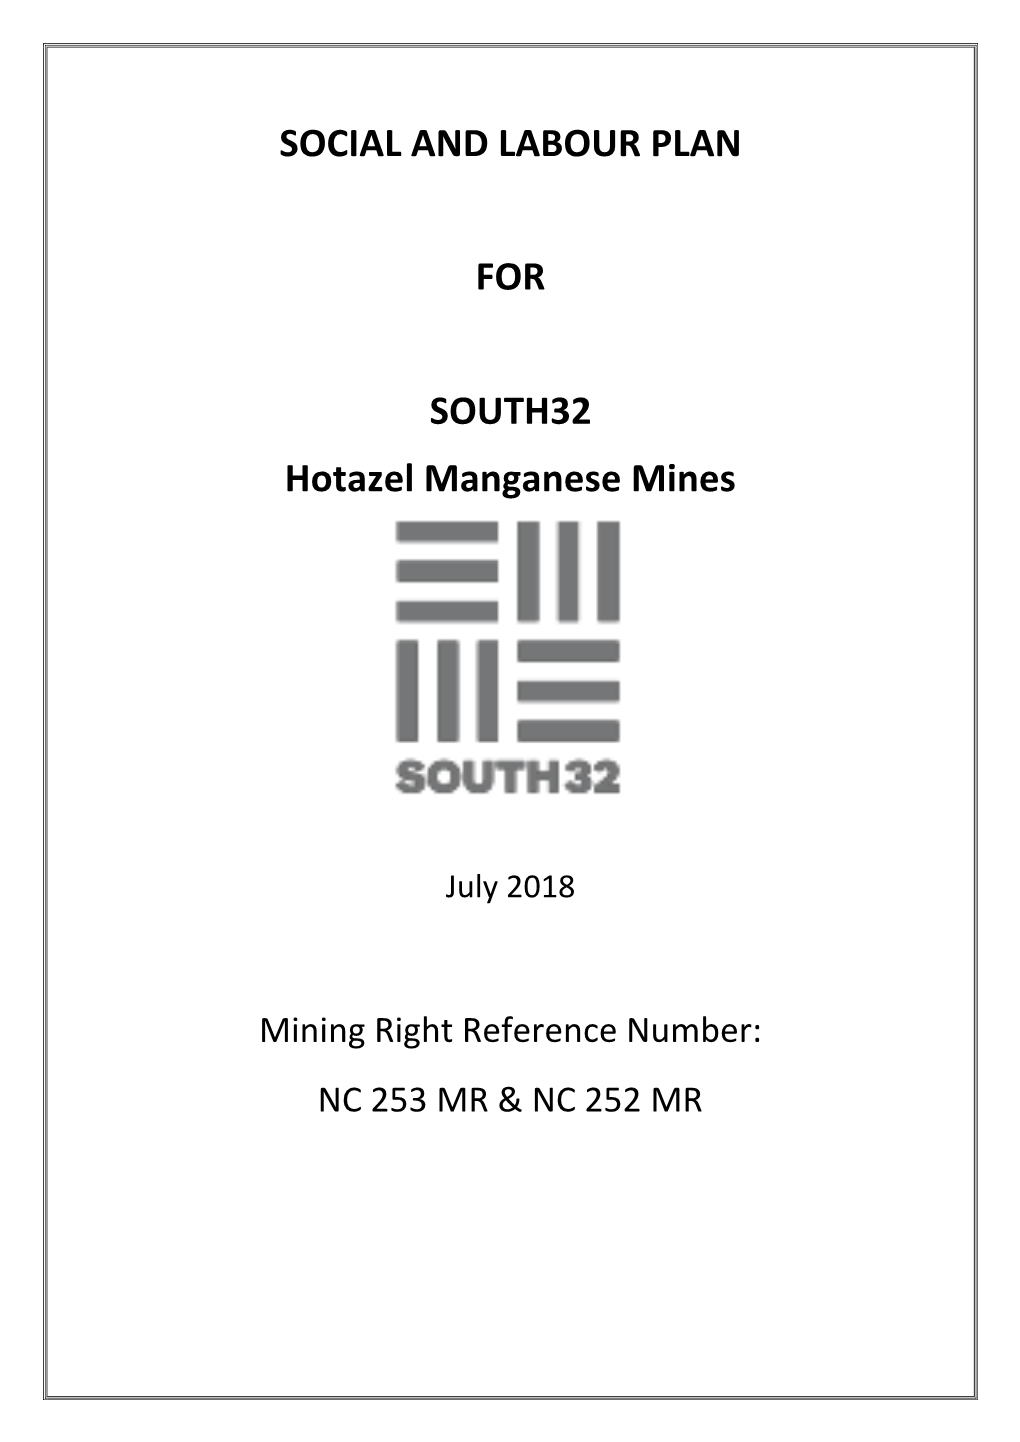 SOCIAL and LABOUR PLAN for SOUTH32 Hotazel Manganese Mines